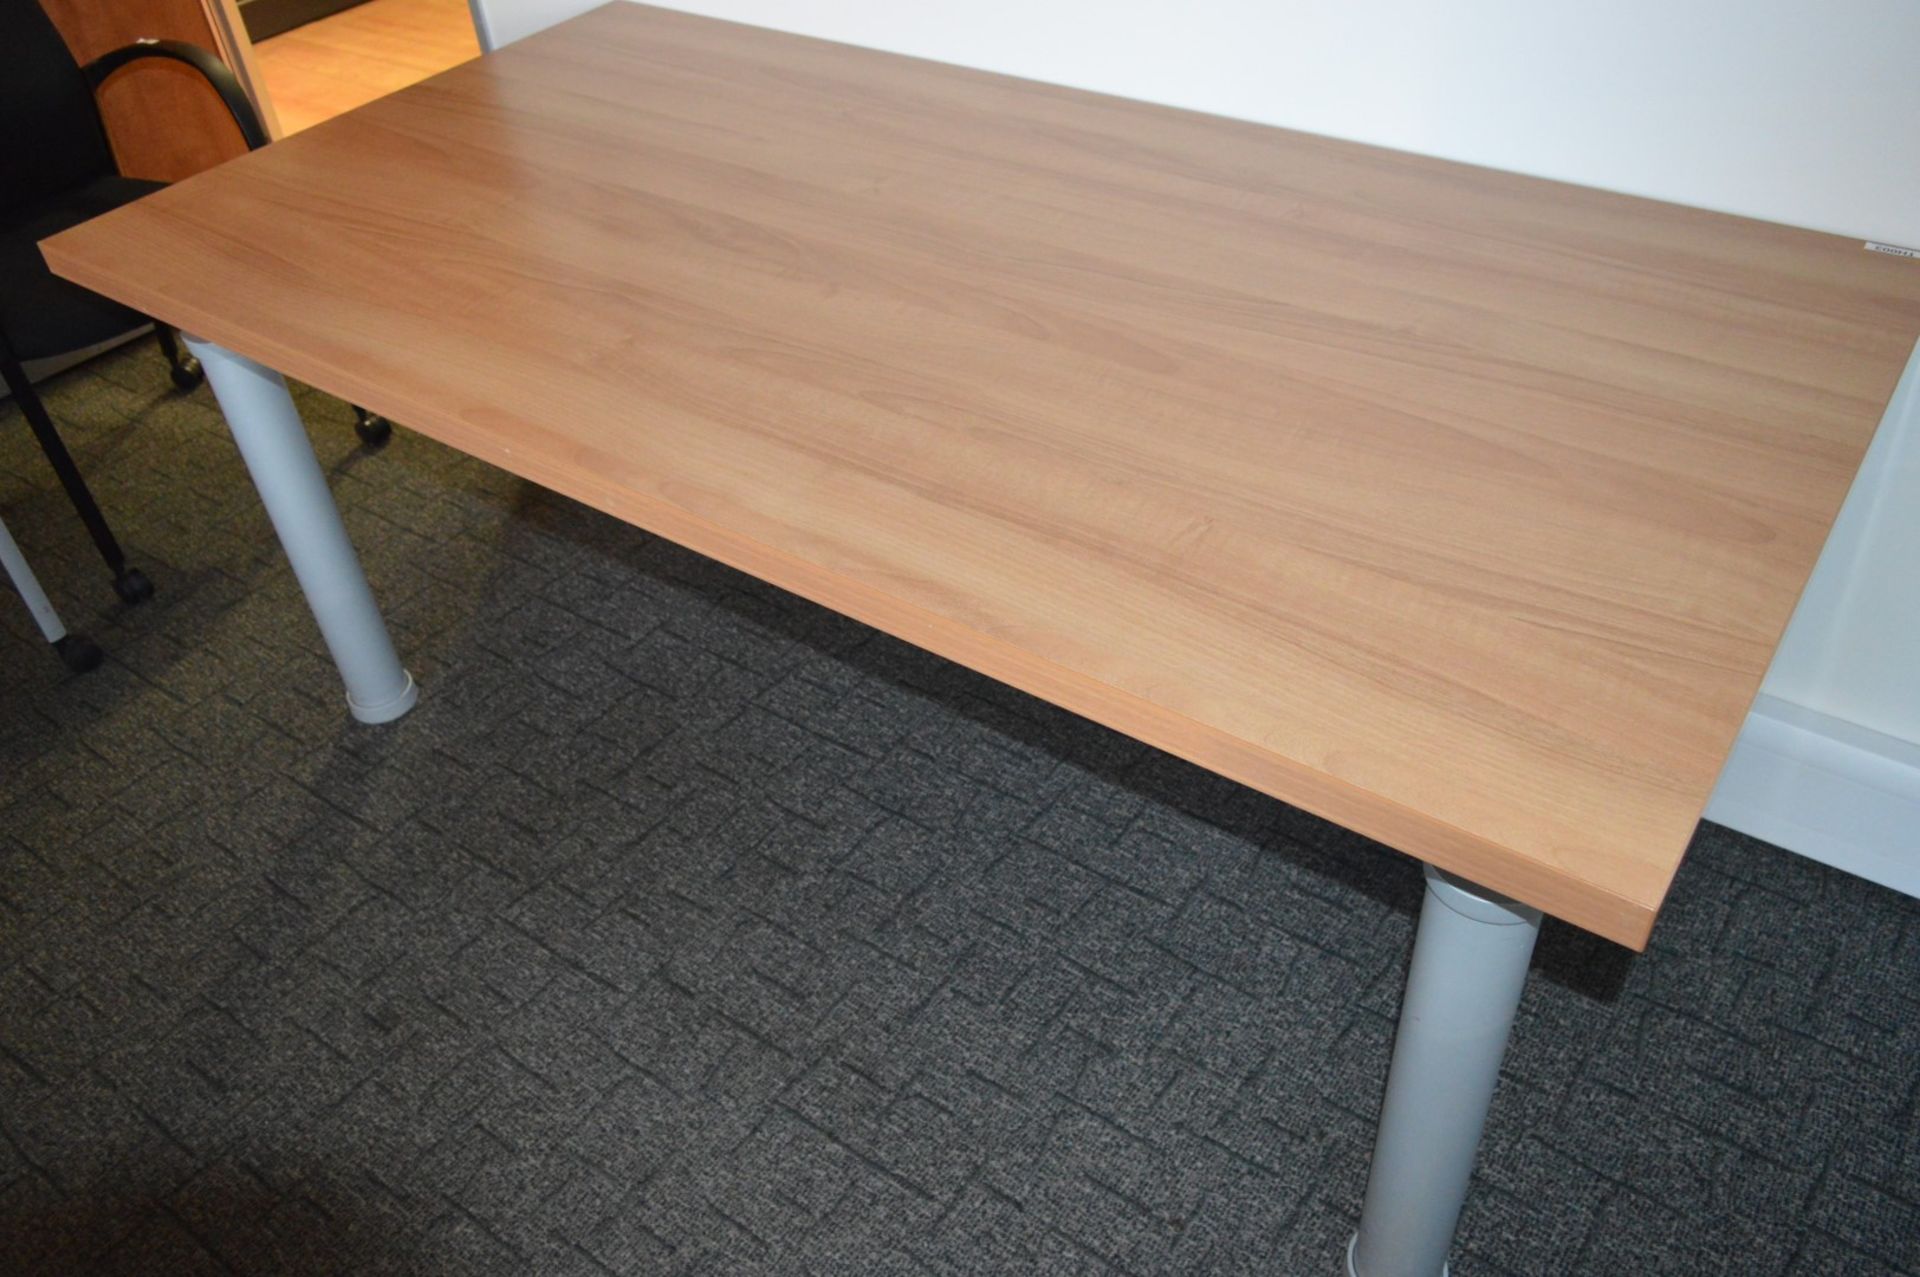 1 x Conference Office Table - Beech Finish - High Quality Office Furniture - H73.5 x W175 x D90 - Image 4 of 13